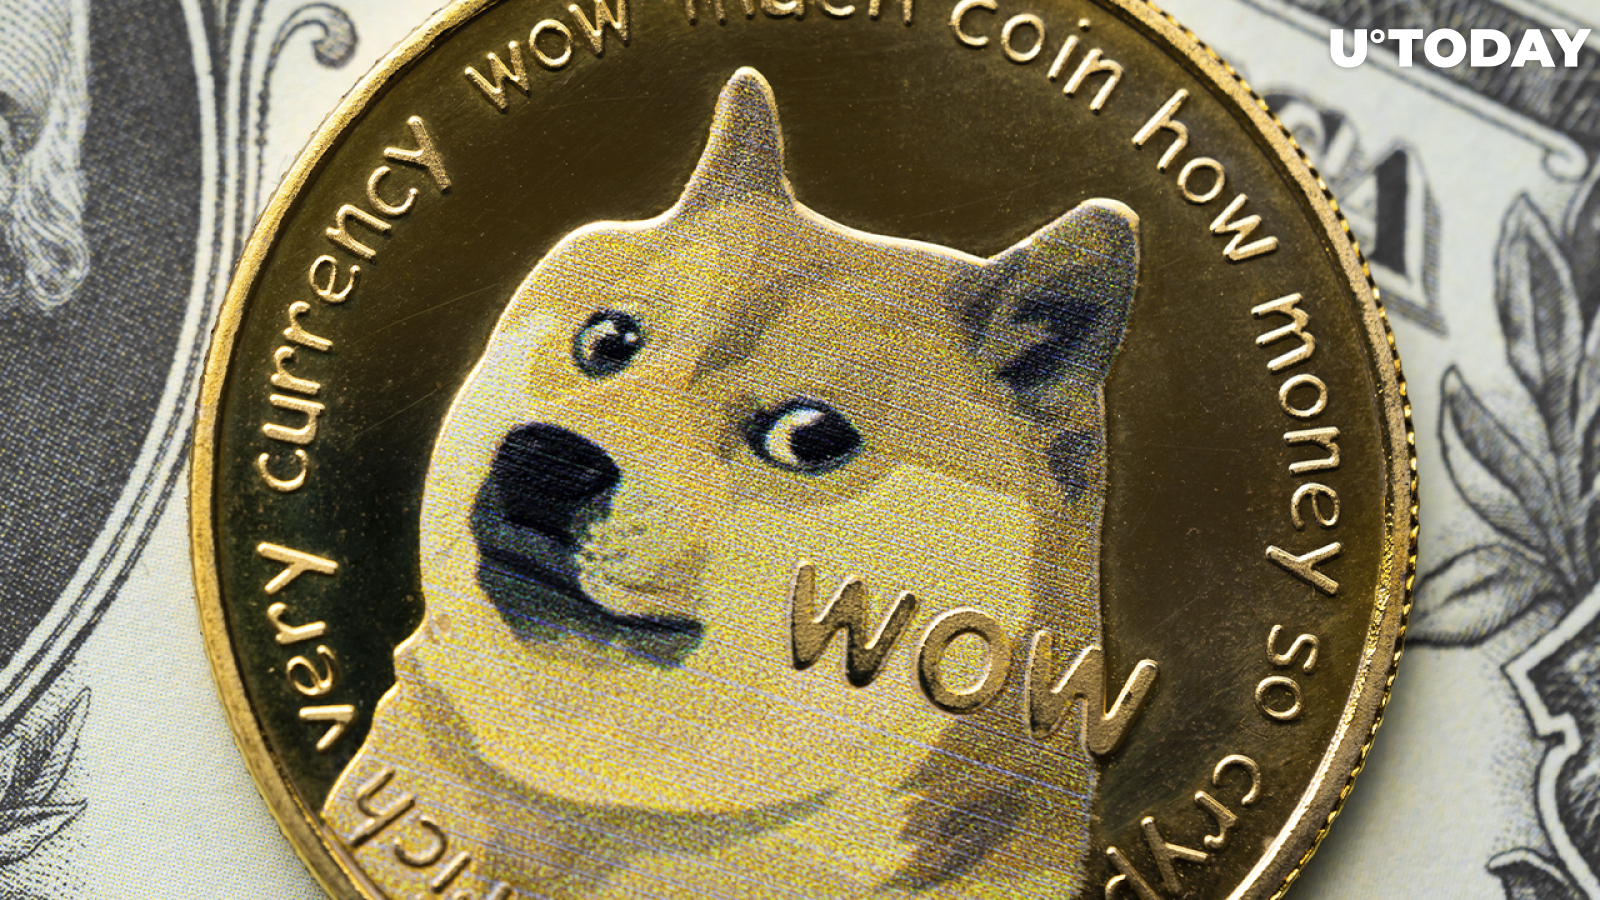 Dogecoin Bounced by 20% in Last 24 Hours: Here's Why